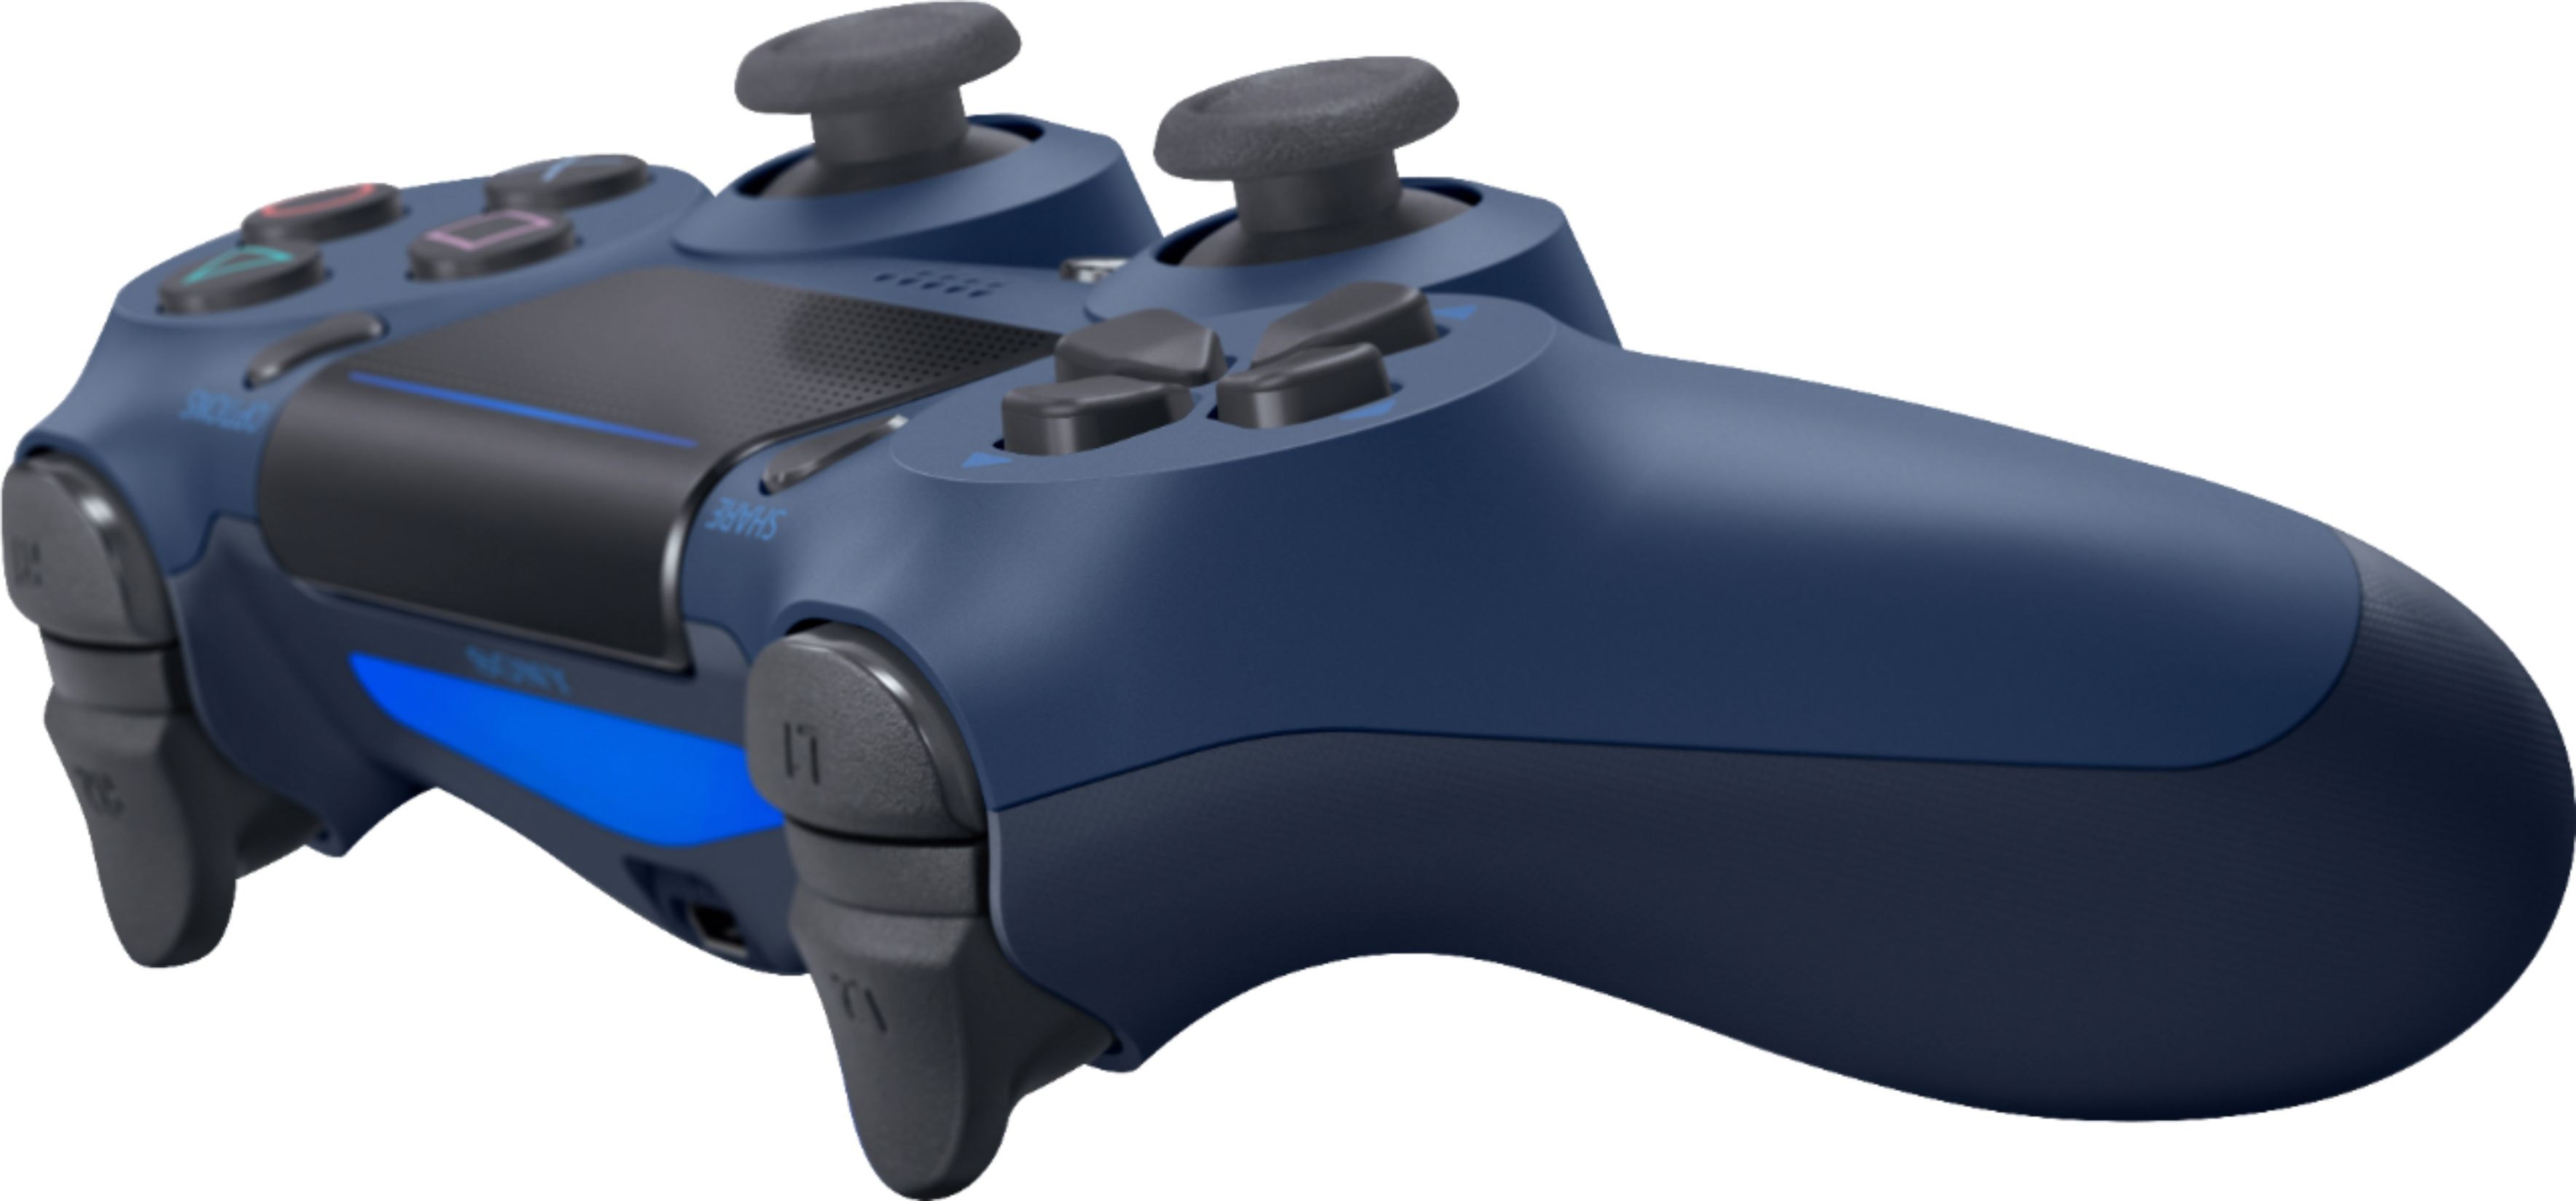 Sony PS4 DualShock 4 Wireless Controller - Midnight Blue - image 2 of 5